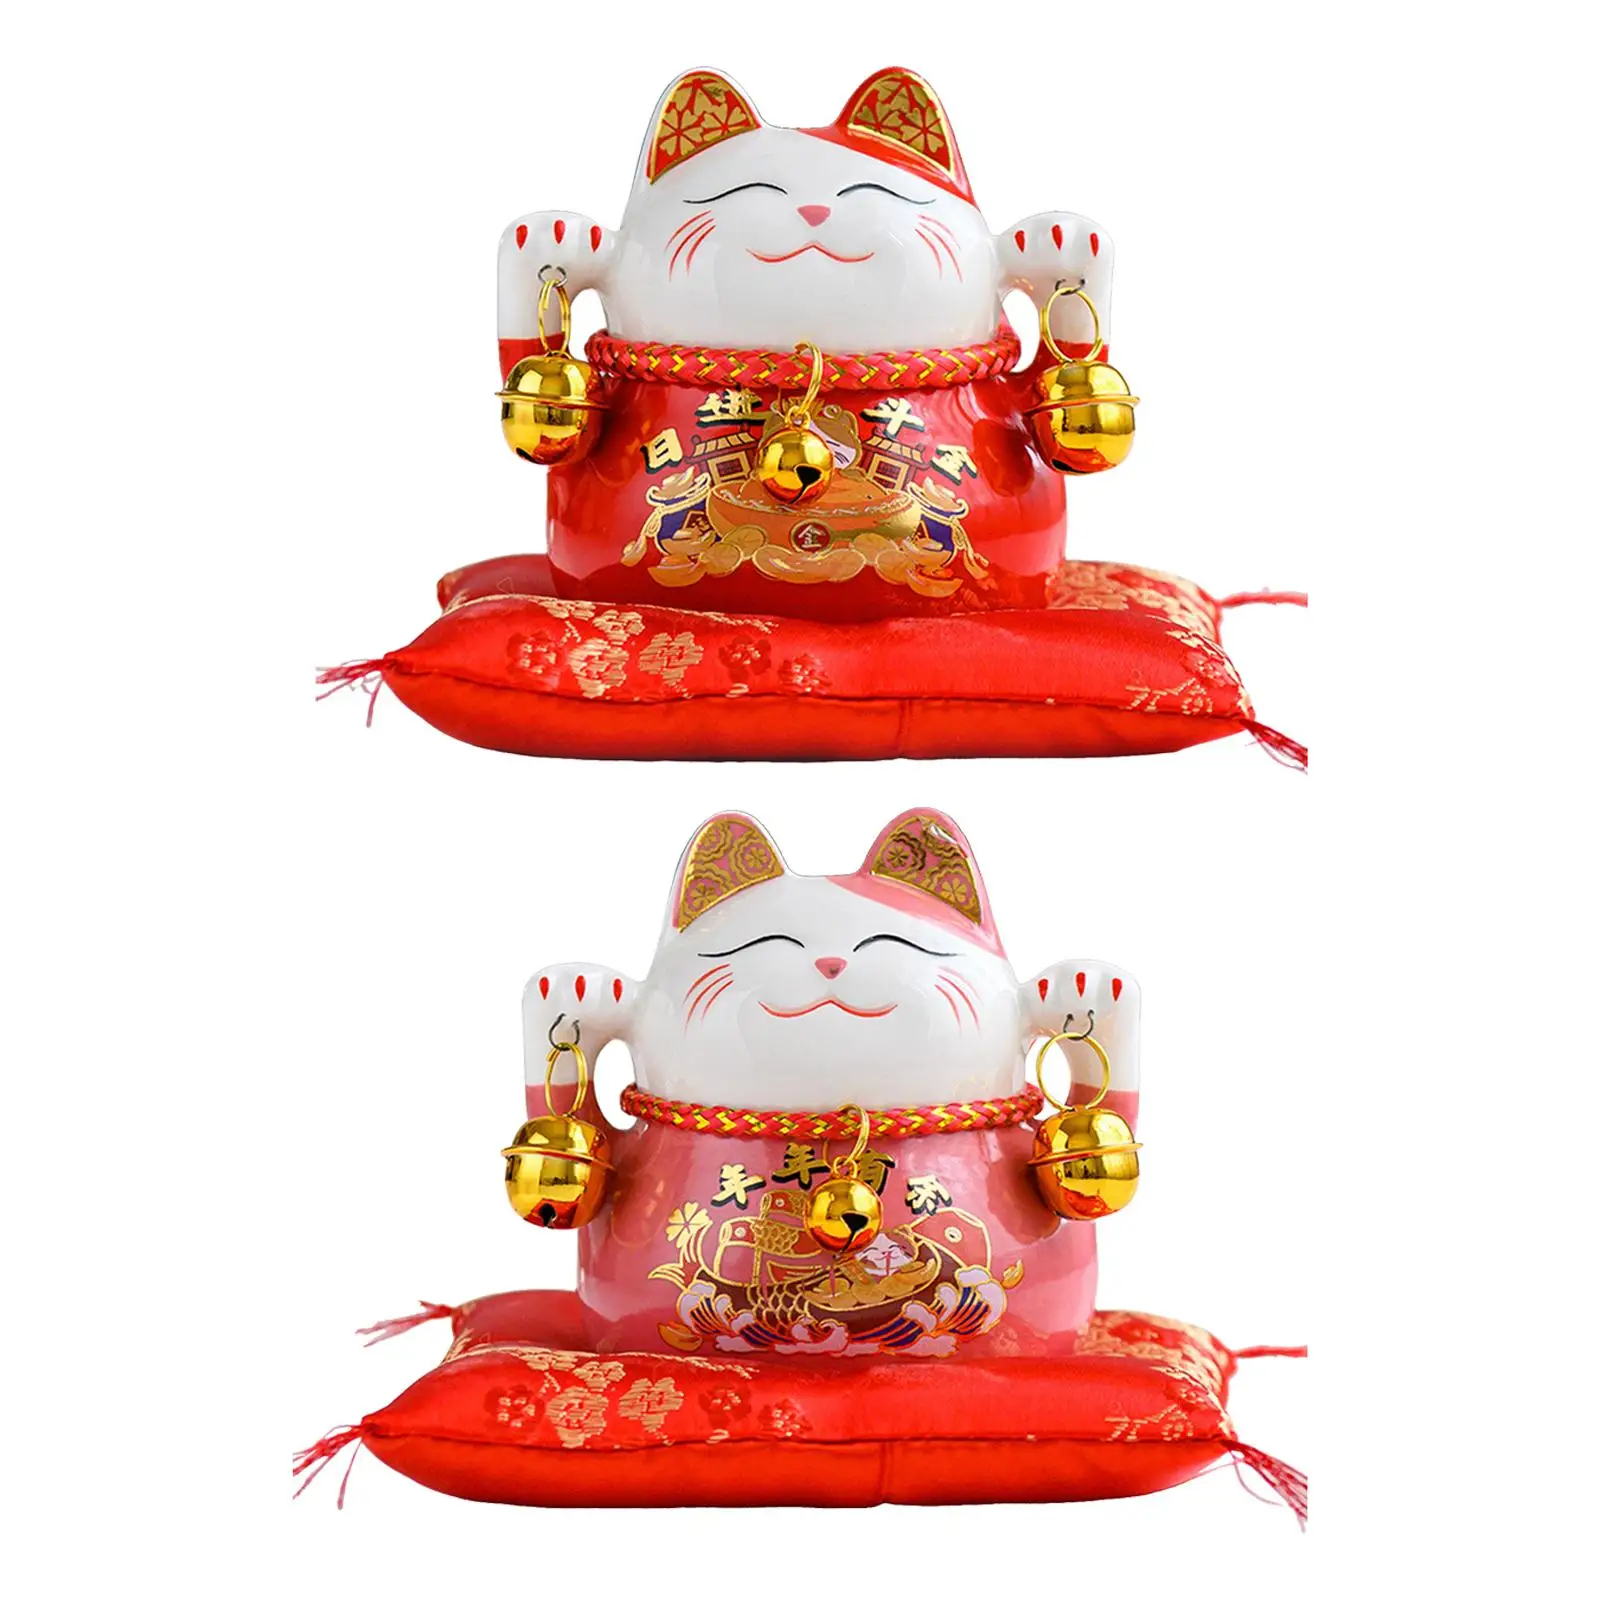 Chinese Style Lucky Cat Money Bank Saving Box Animal Figurine Decorative Kitten Statue for Desk Office Decor Dining Room Gift